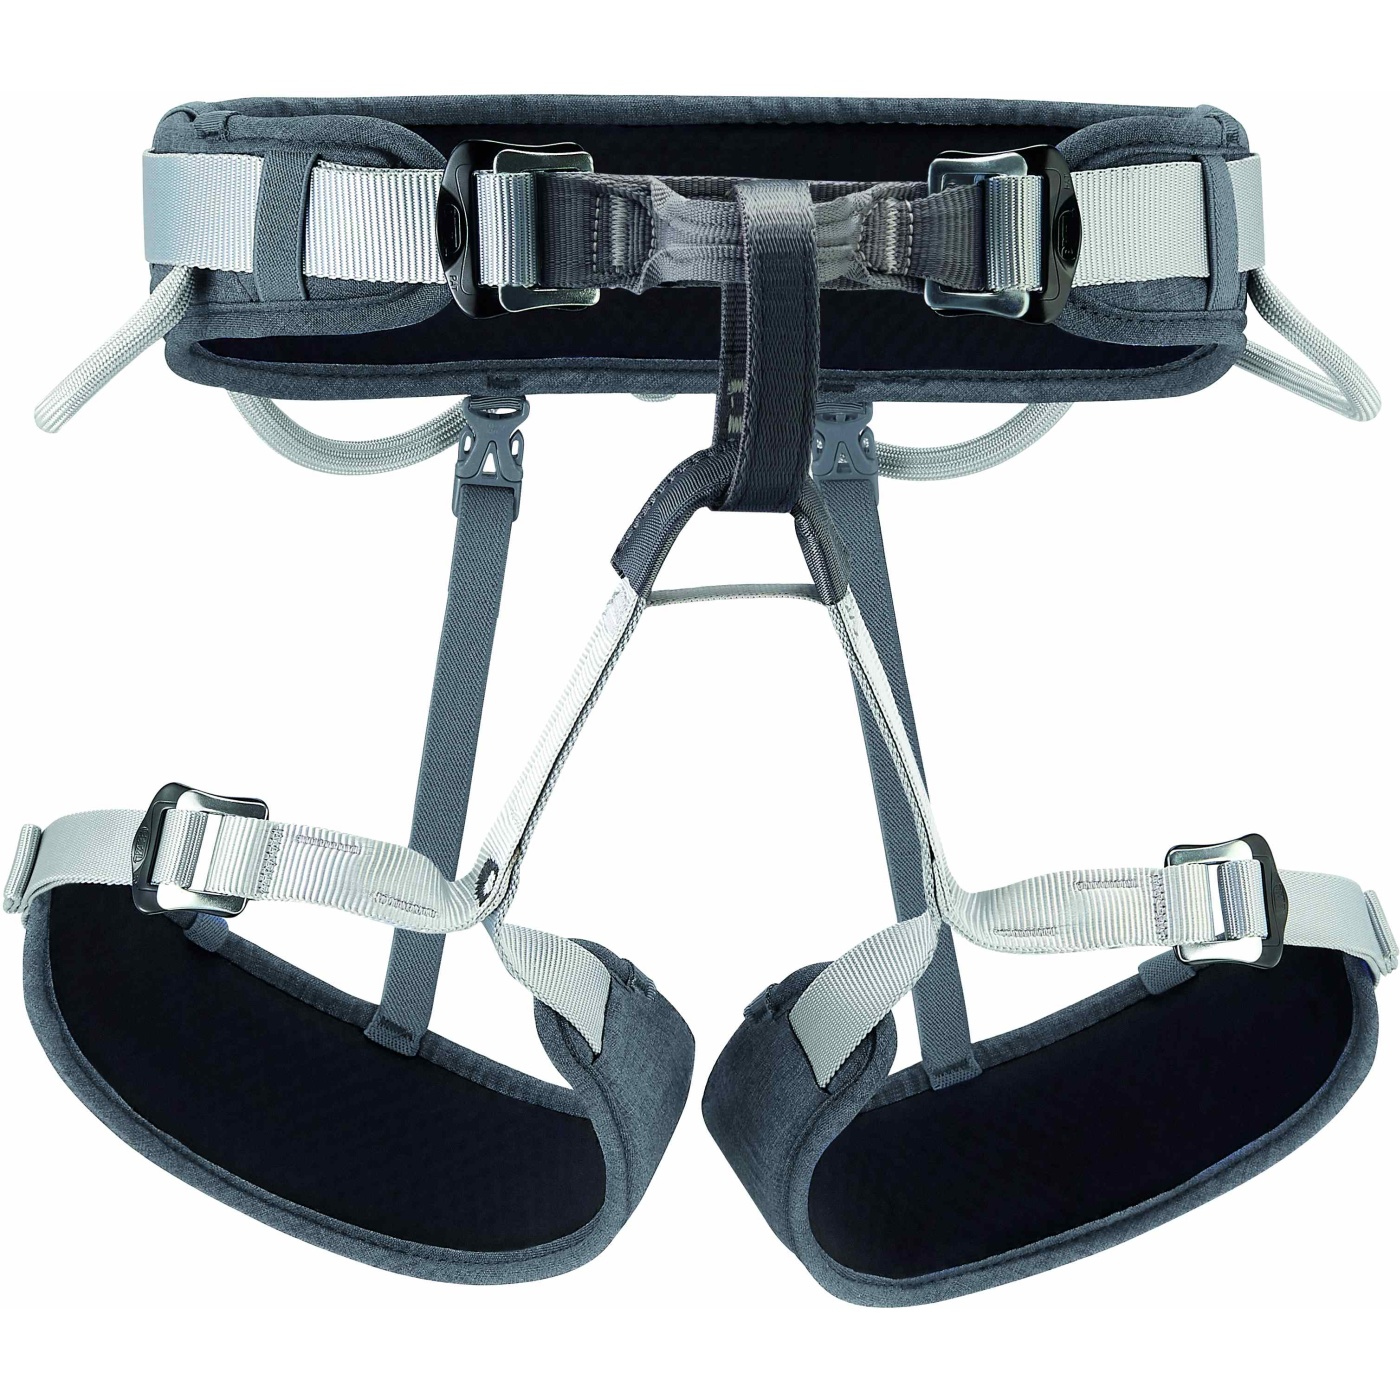 Picture of Petzl Corax Harness - grey